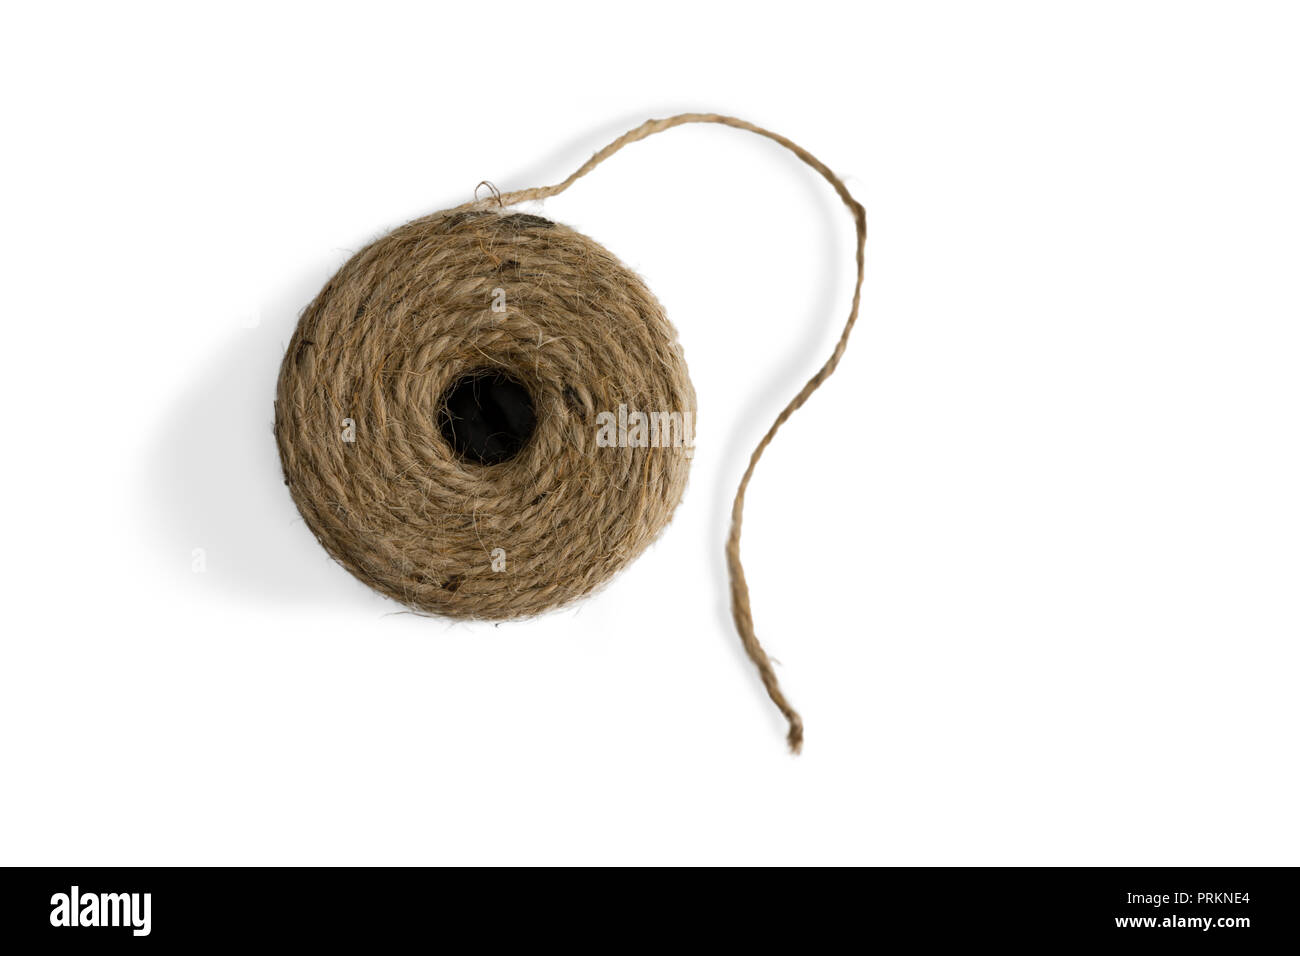 Top down view on a ball of jute twine or string with natural twisted fibers wound into a ball for household and domestic use on a white background Stock Photo